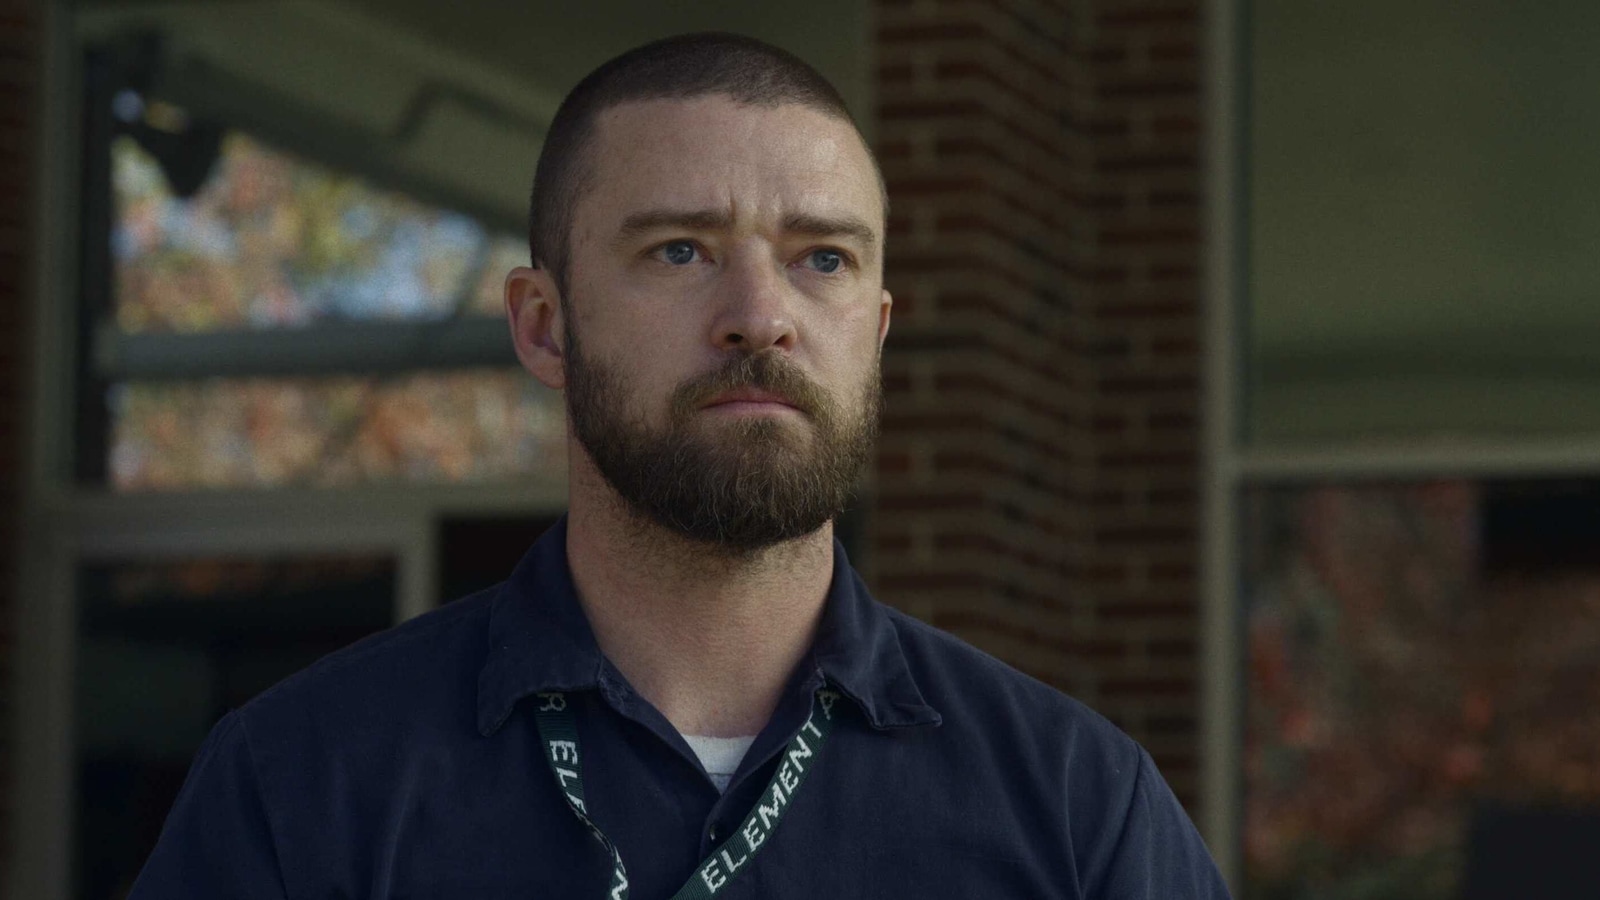 USA. Justin Timberlake in ©Apple TV+ new film: Palmer (2021). Plot: An  ex-convict strikes up a friendship with a boy from a troubled home. Ref:  LMK106-J6937-020321 Supplied by LMKMEDIA. Editorial Only. Landmark